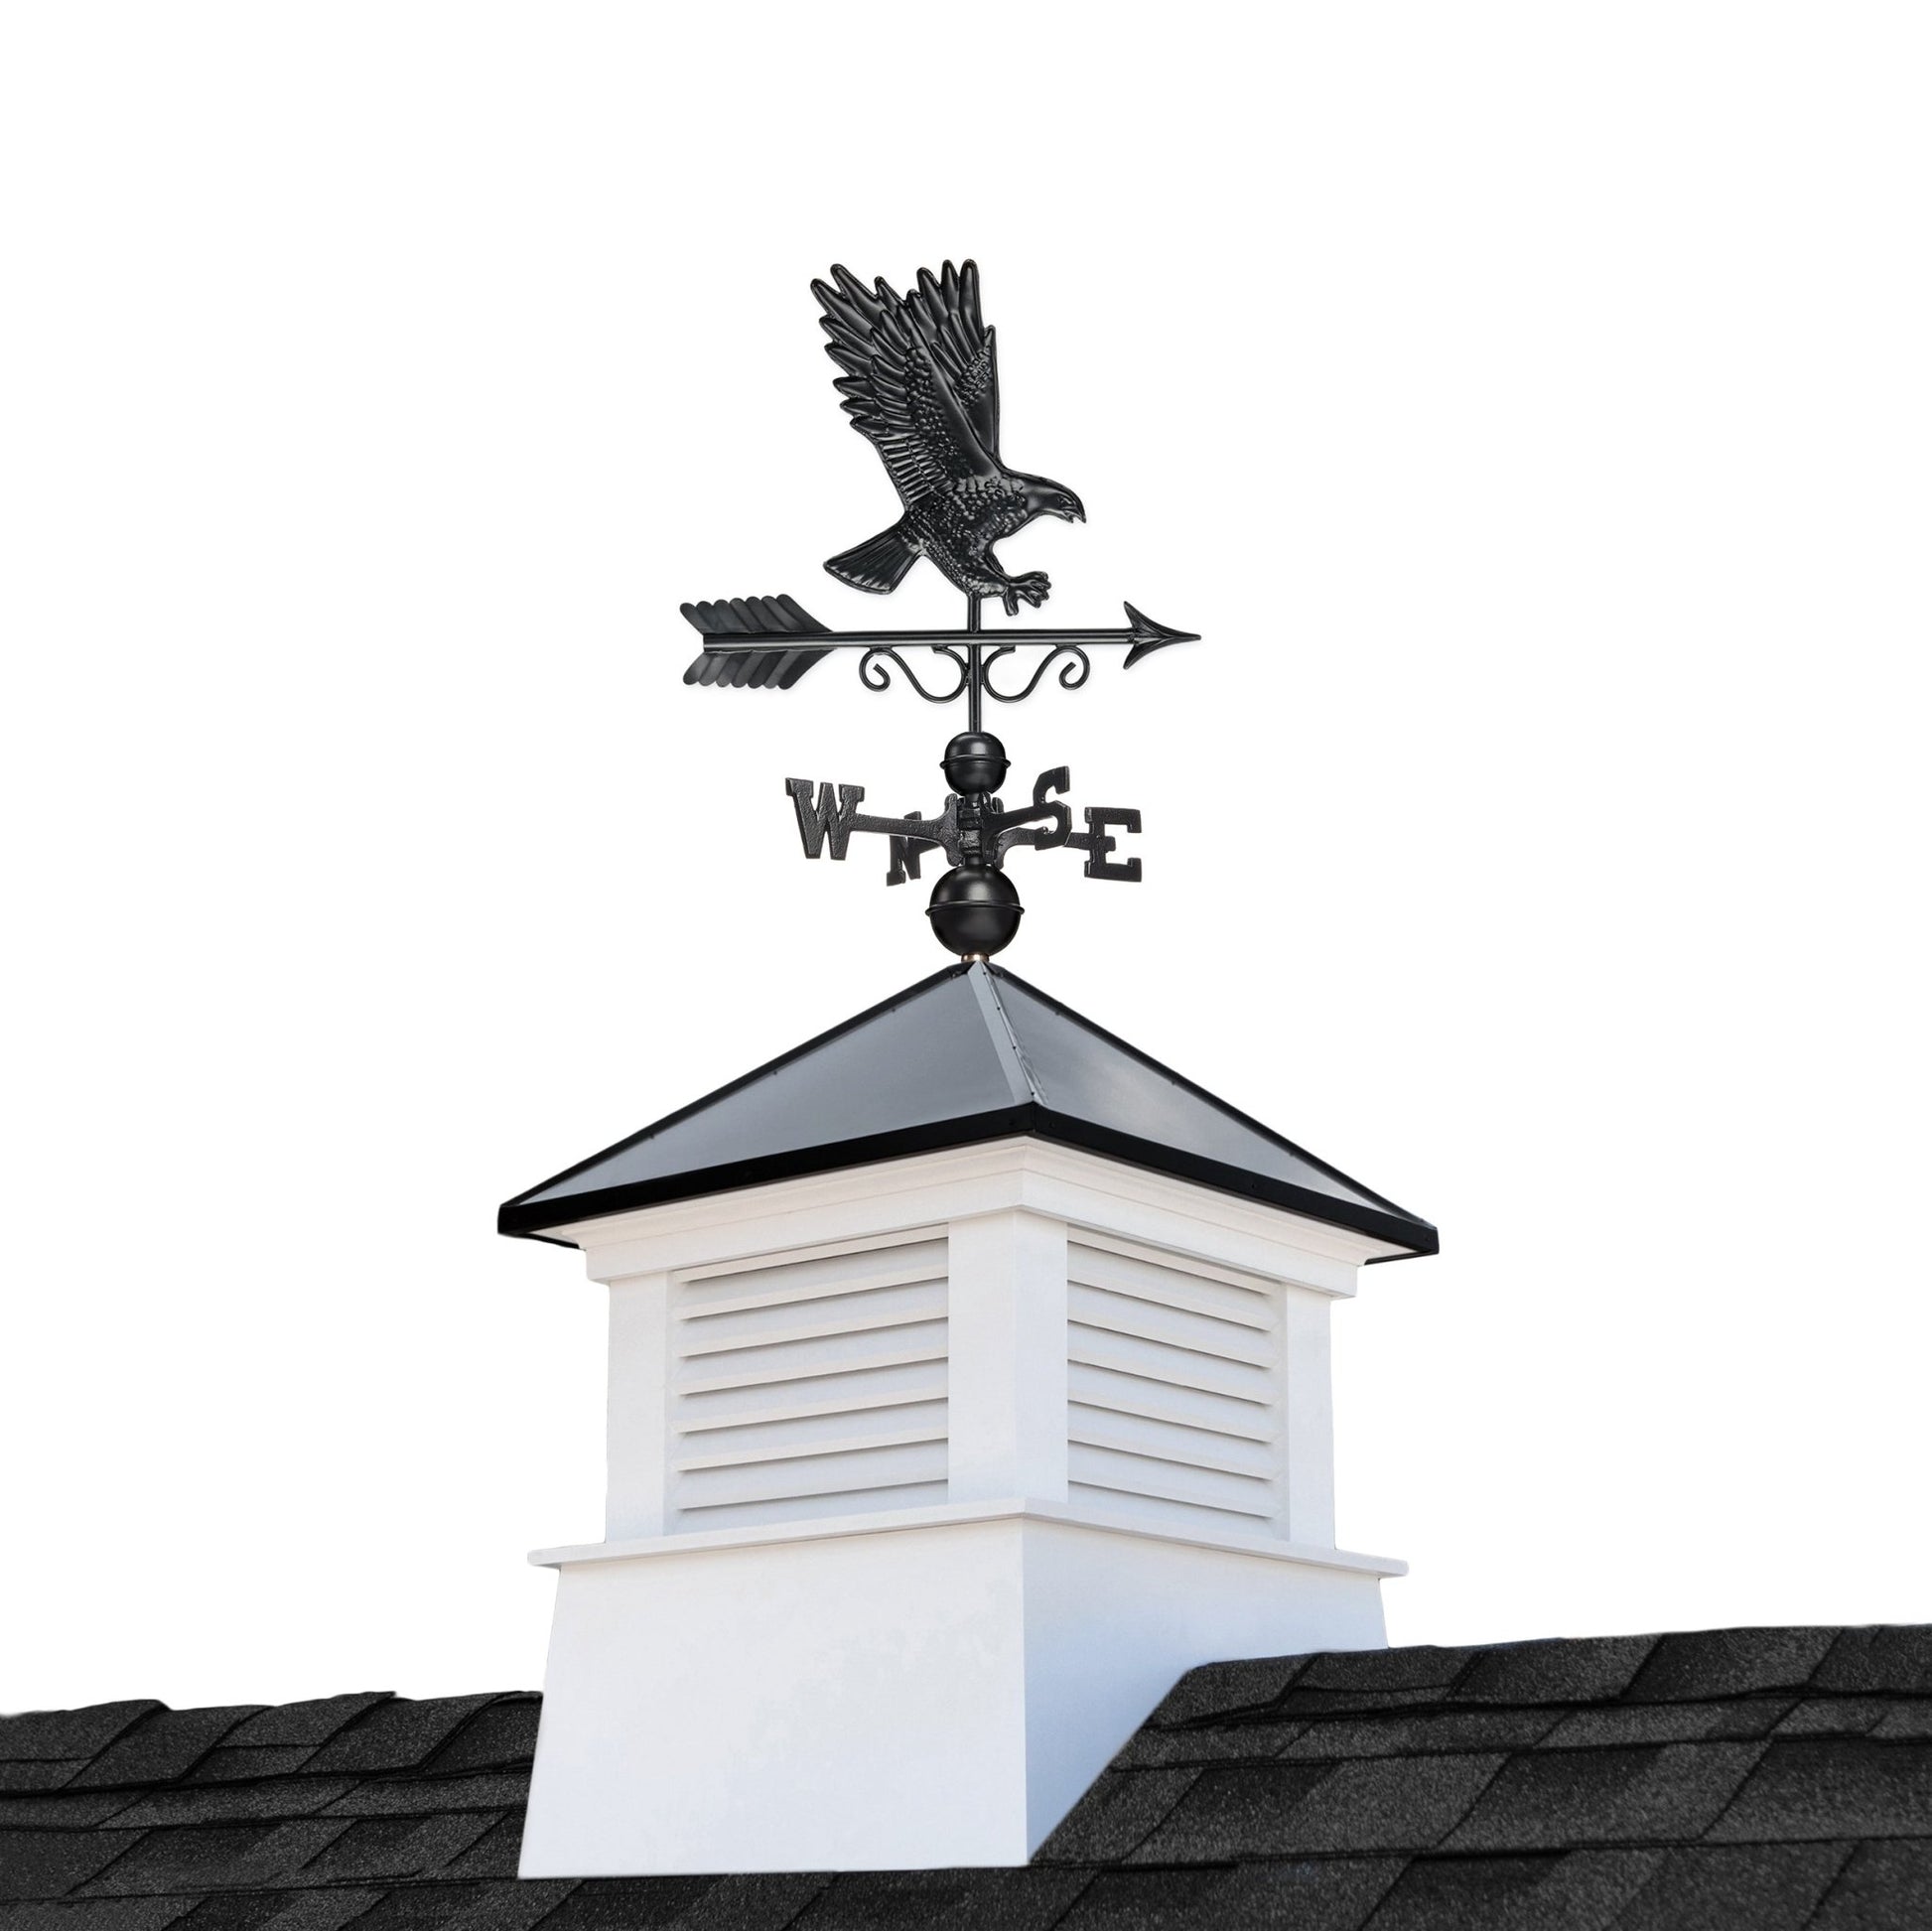 26" Square Manchester Vinyl Cupola with Black Aluminum roof and Black Aluminum Eagle Weathervane - Good Directions